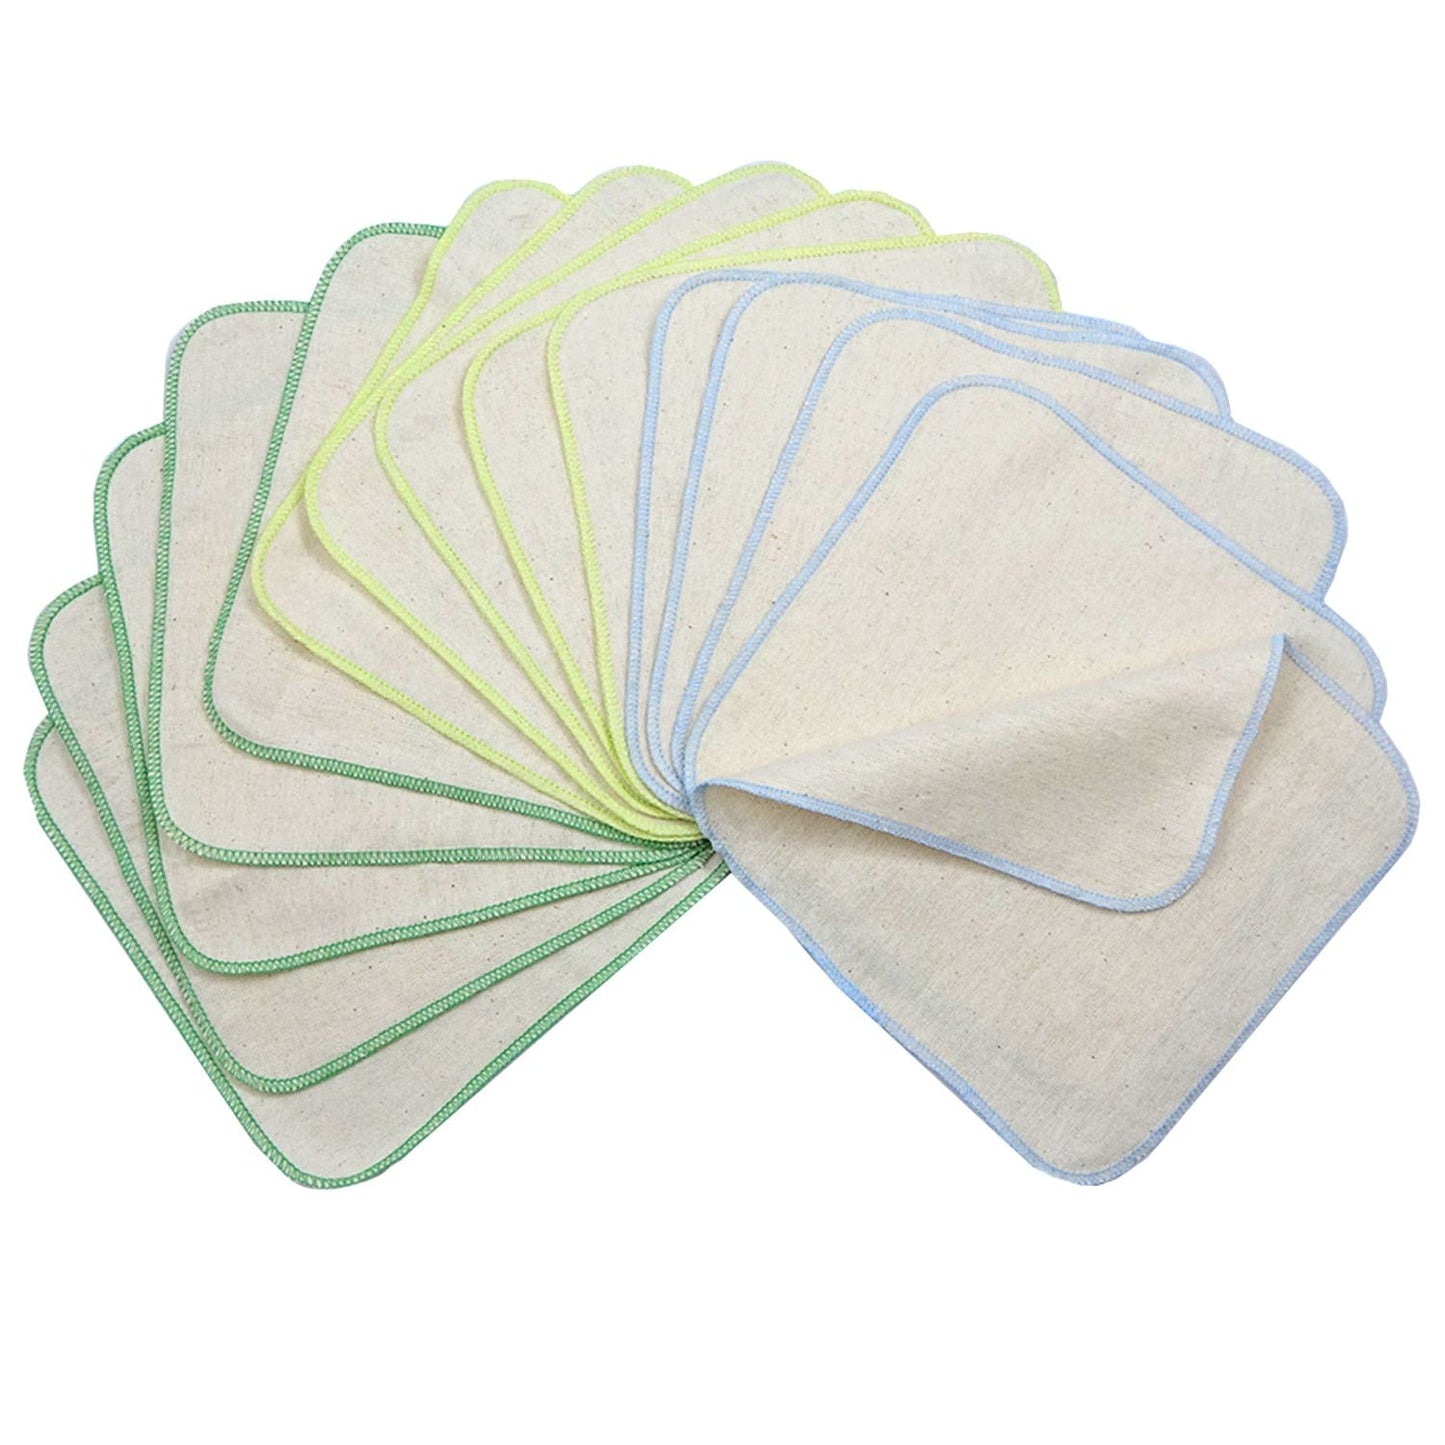 Avo & Cado - Flannel Organic Cotton Wipes - 15 pack-Accessories-Avo & Cado-Lilac Edging-The Nappy Market